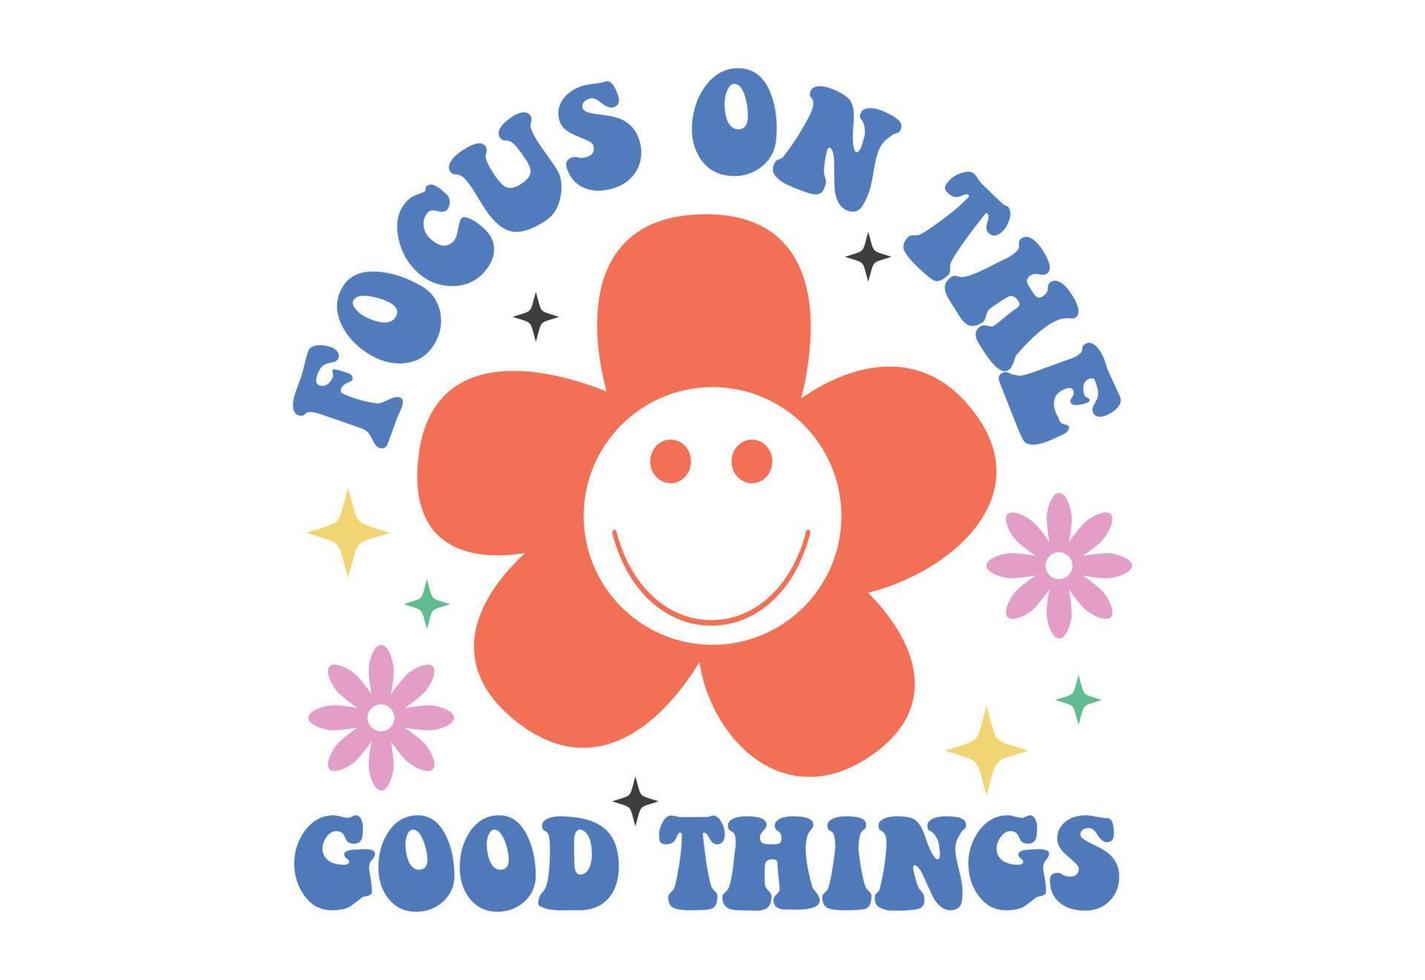 Focus On The Good Things vector